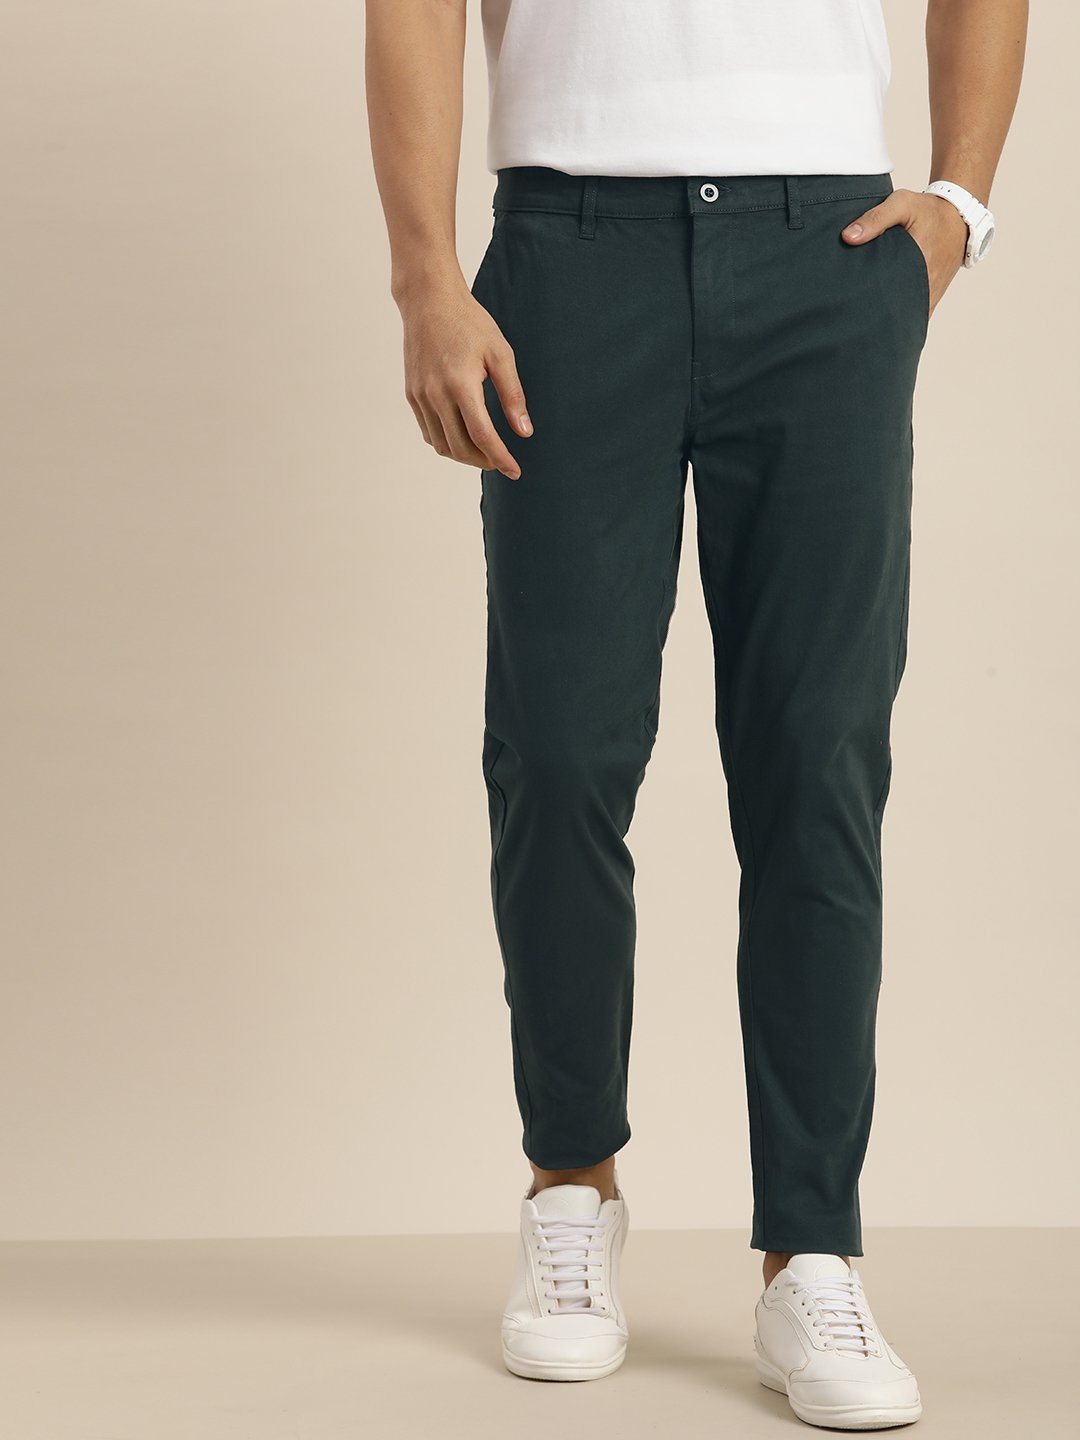 Difference of Opinion | Difference of Opinion Teal Solid Angle Length Trouser